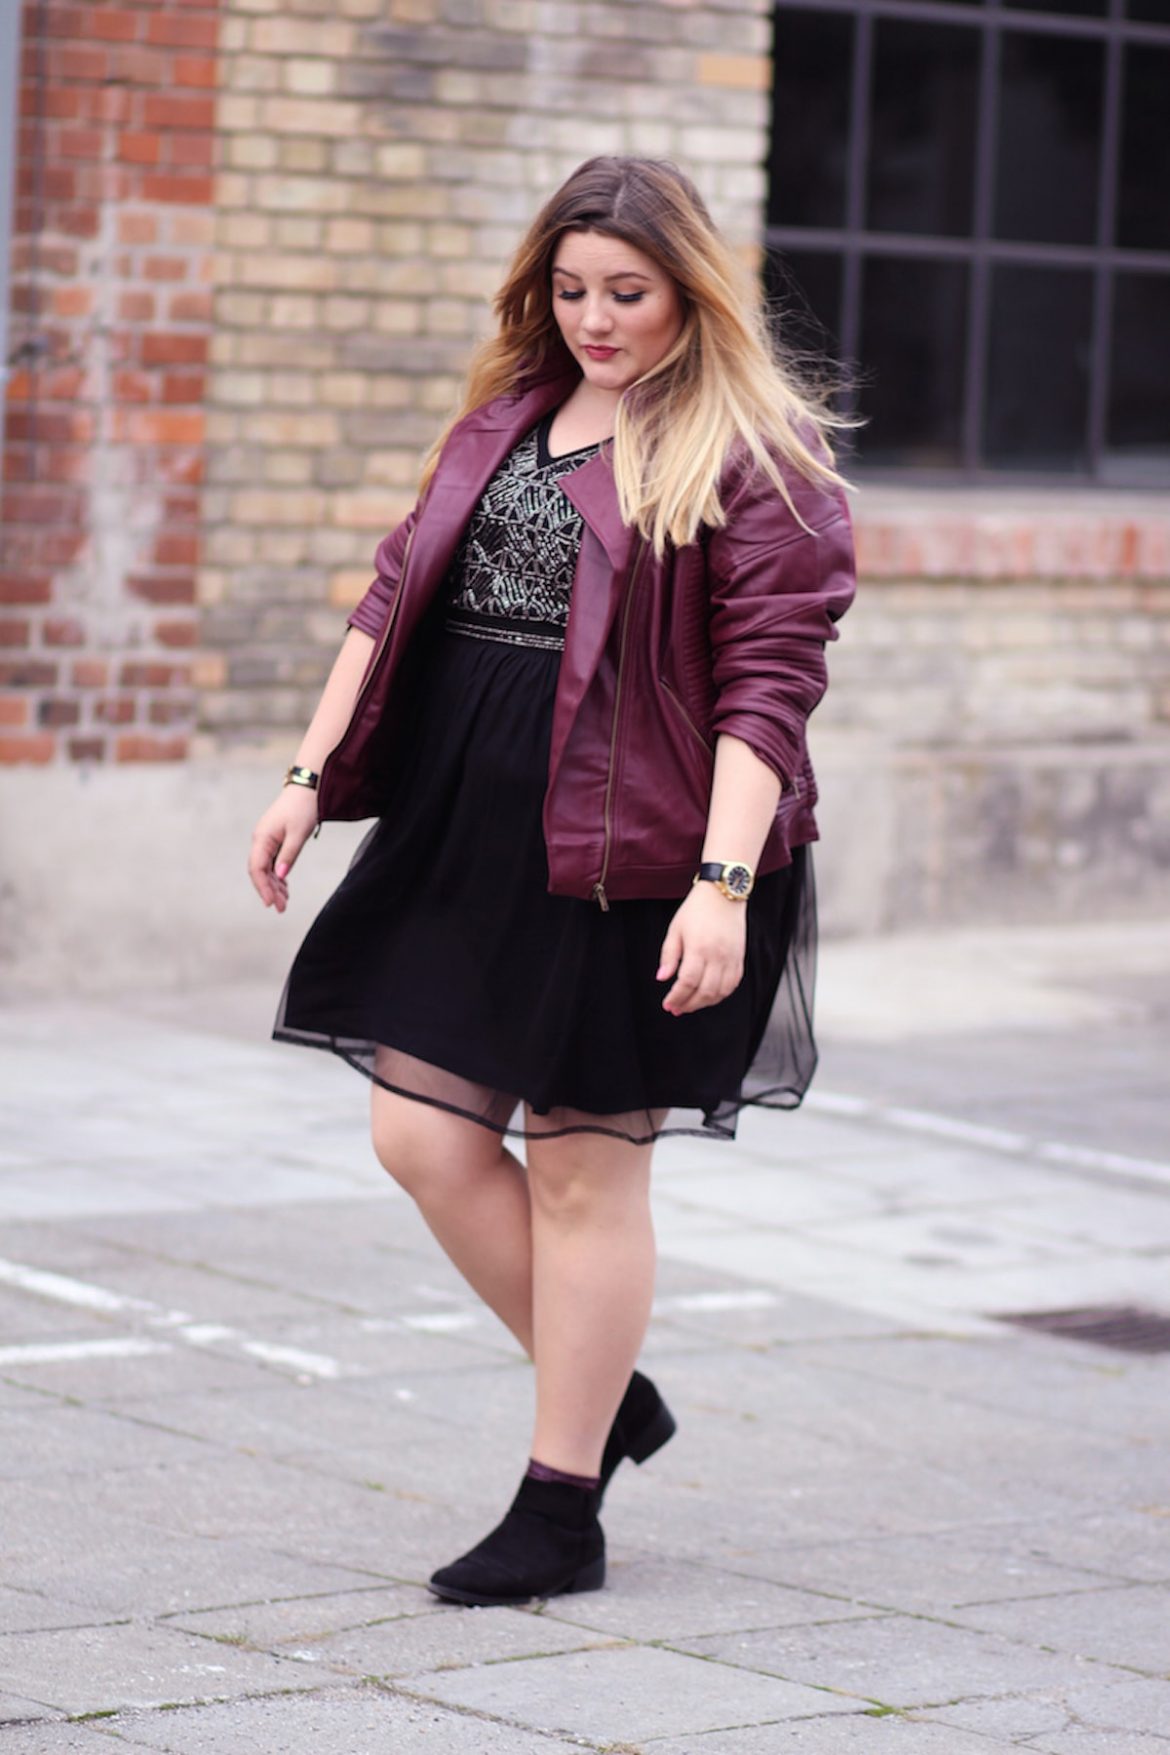 plus size rockstar outfit for chubby